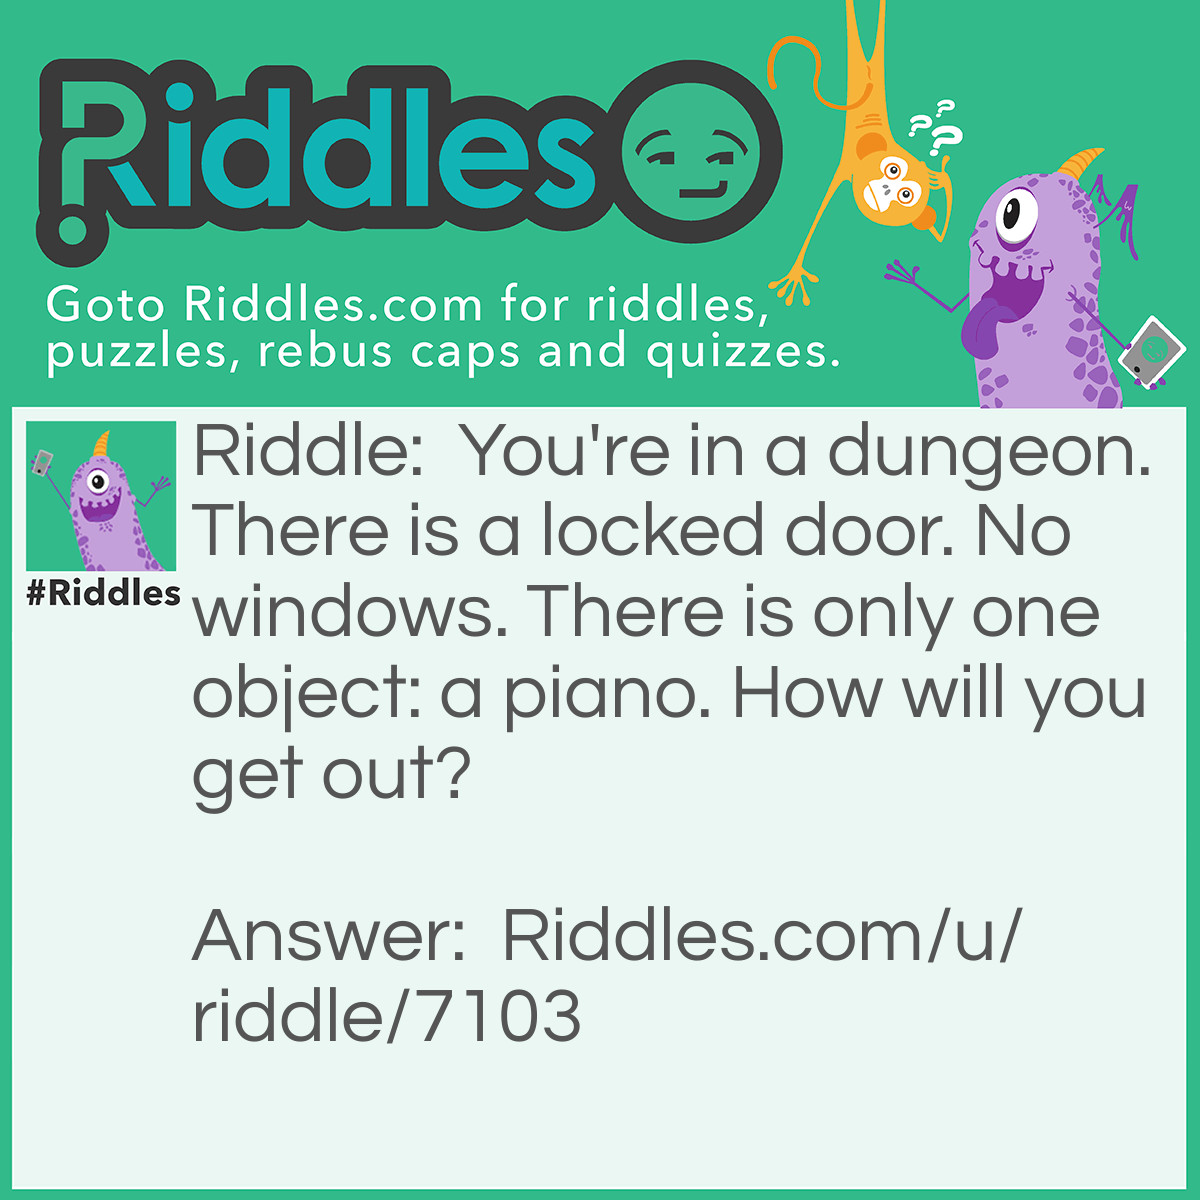 Riddle: You're in a dungeon. There is a locked door. No windows. There is only one object: a piano. How will you get out? Answer: Play the piano until you find the right key.